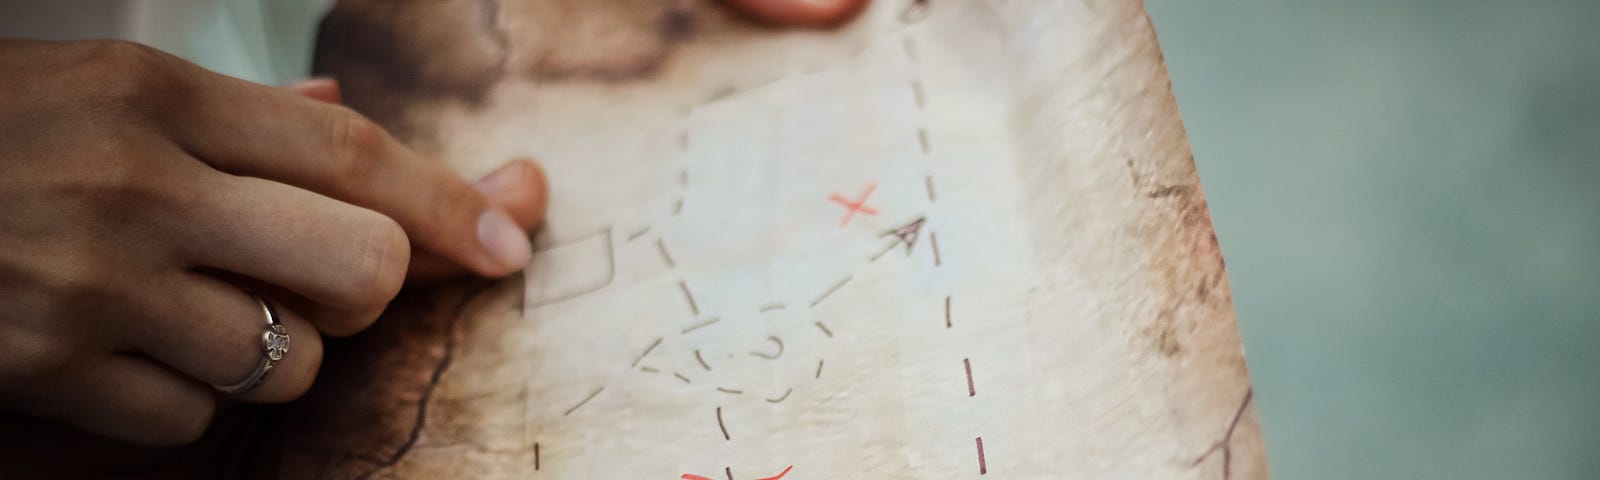 Two sets of hands holding a hand drawn treasure map. One of the hands is pointing to a position on the map.